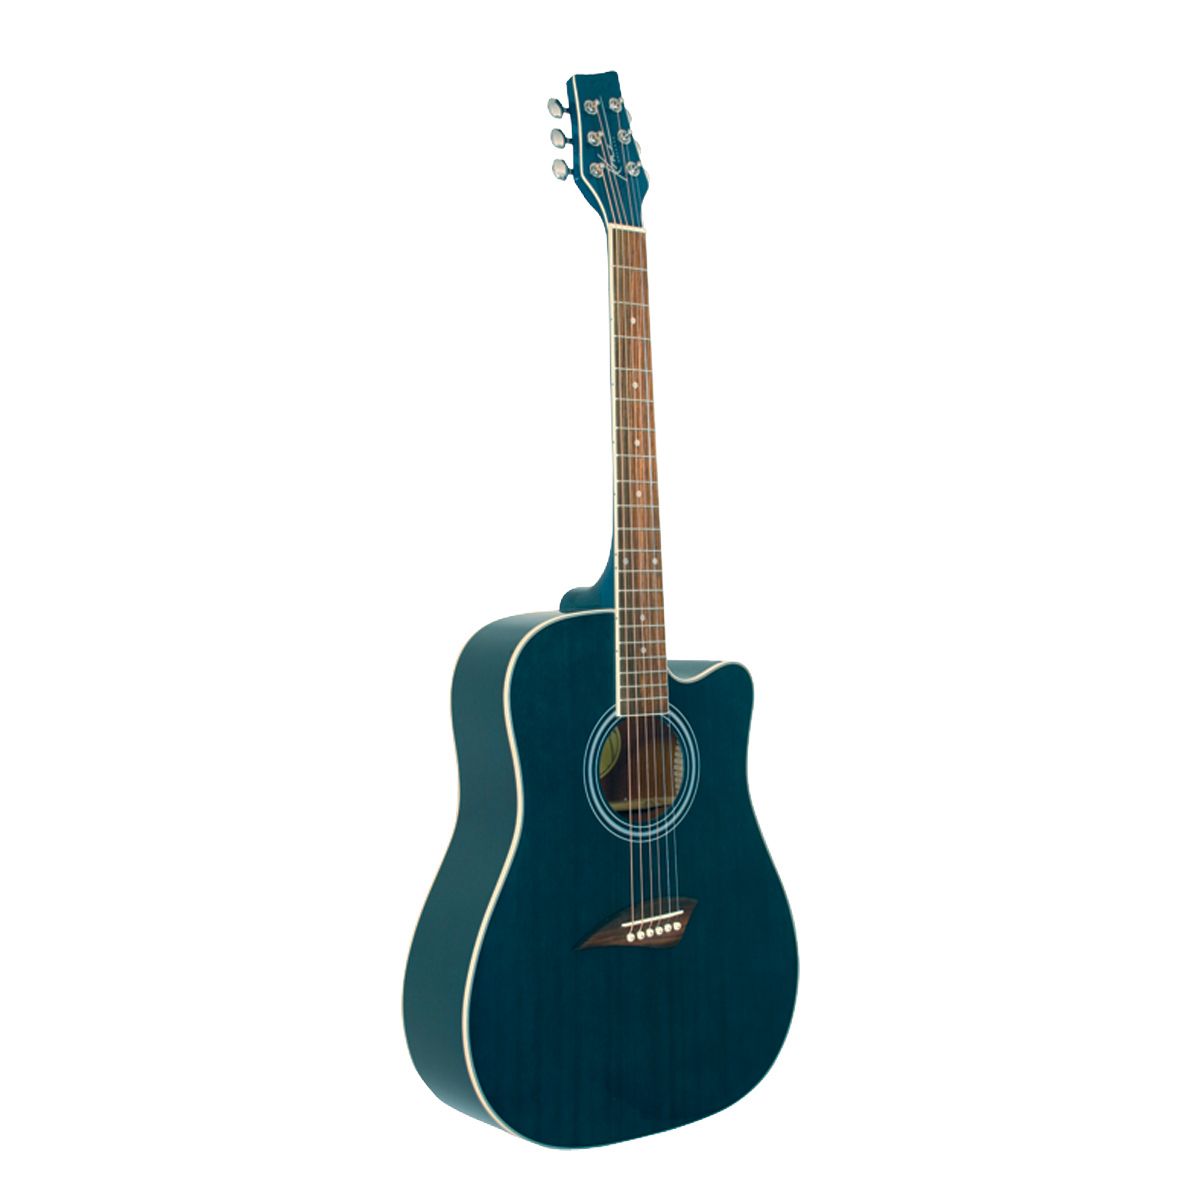 Kona Dreadnought Acoustic Spruce Top Guitar with High-Gloss Transparent Blue Finish